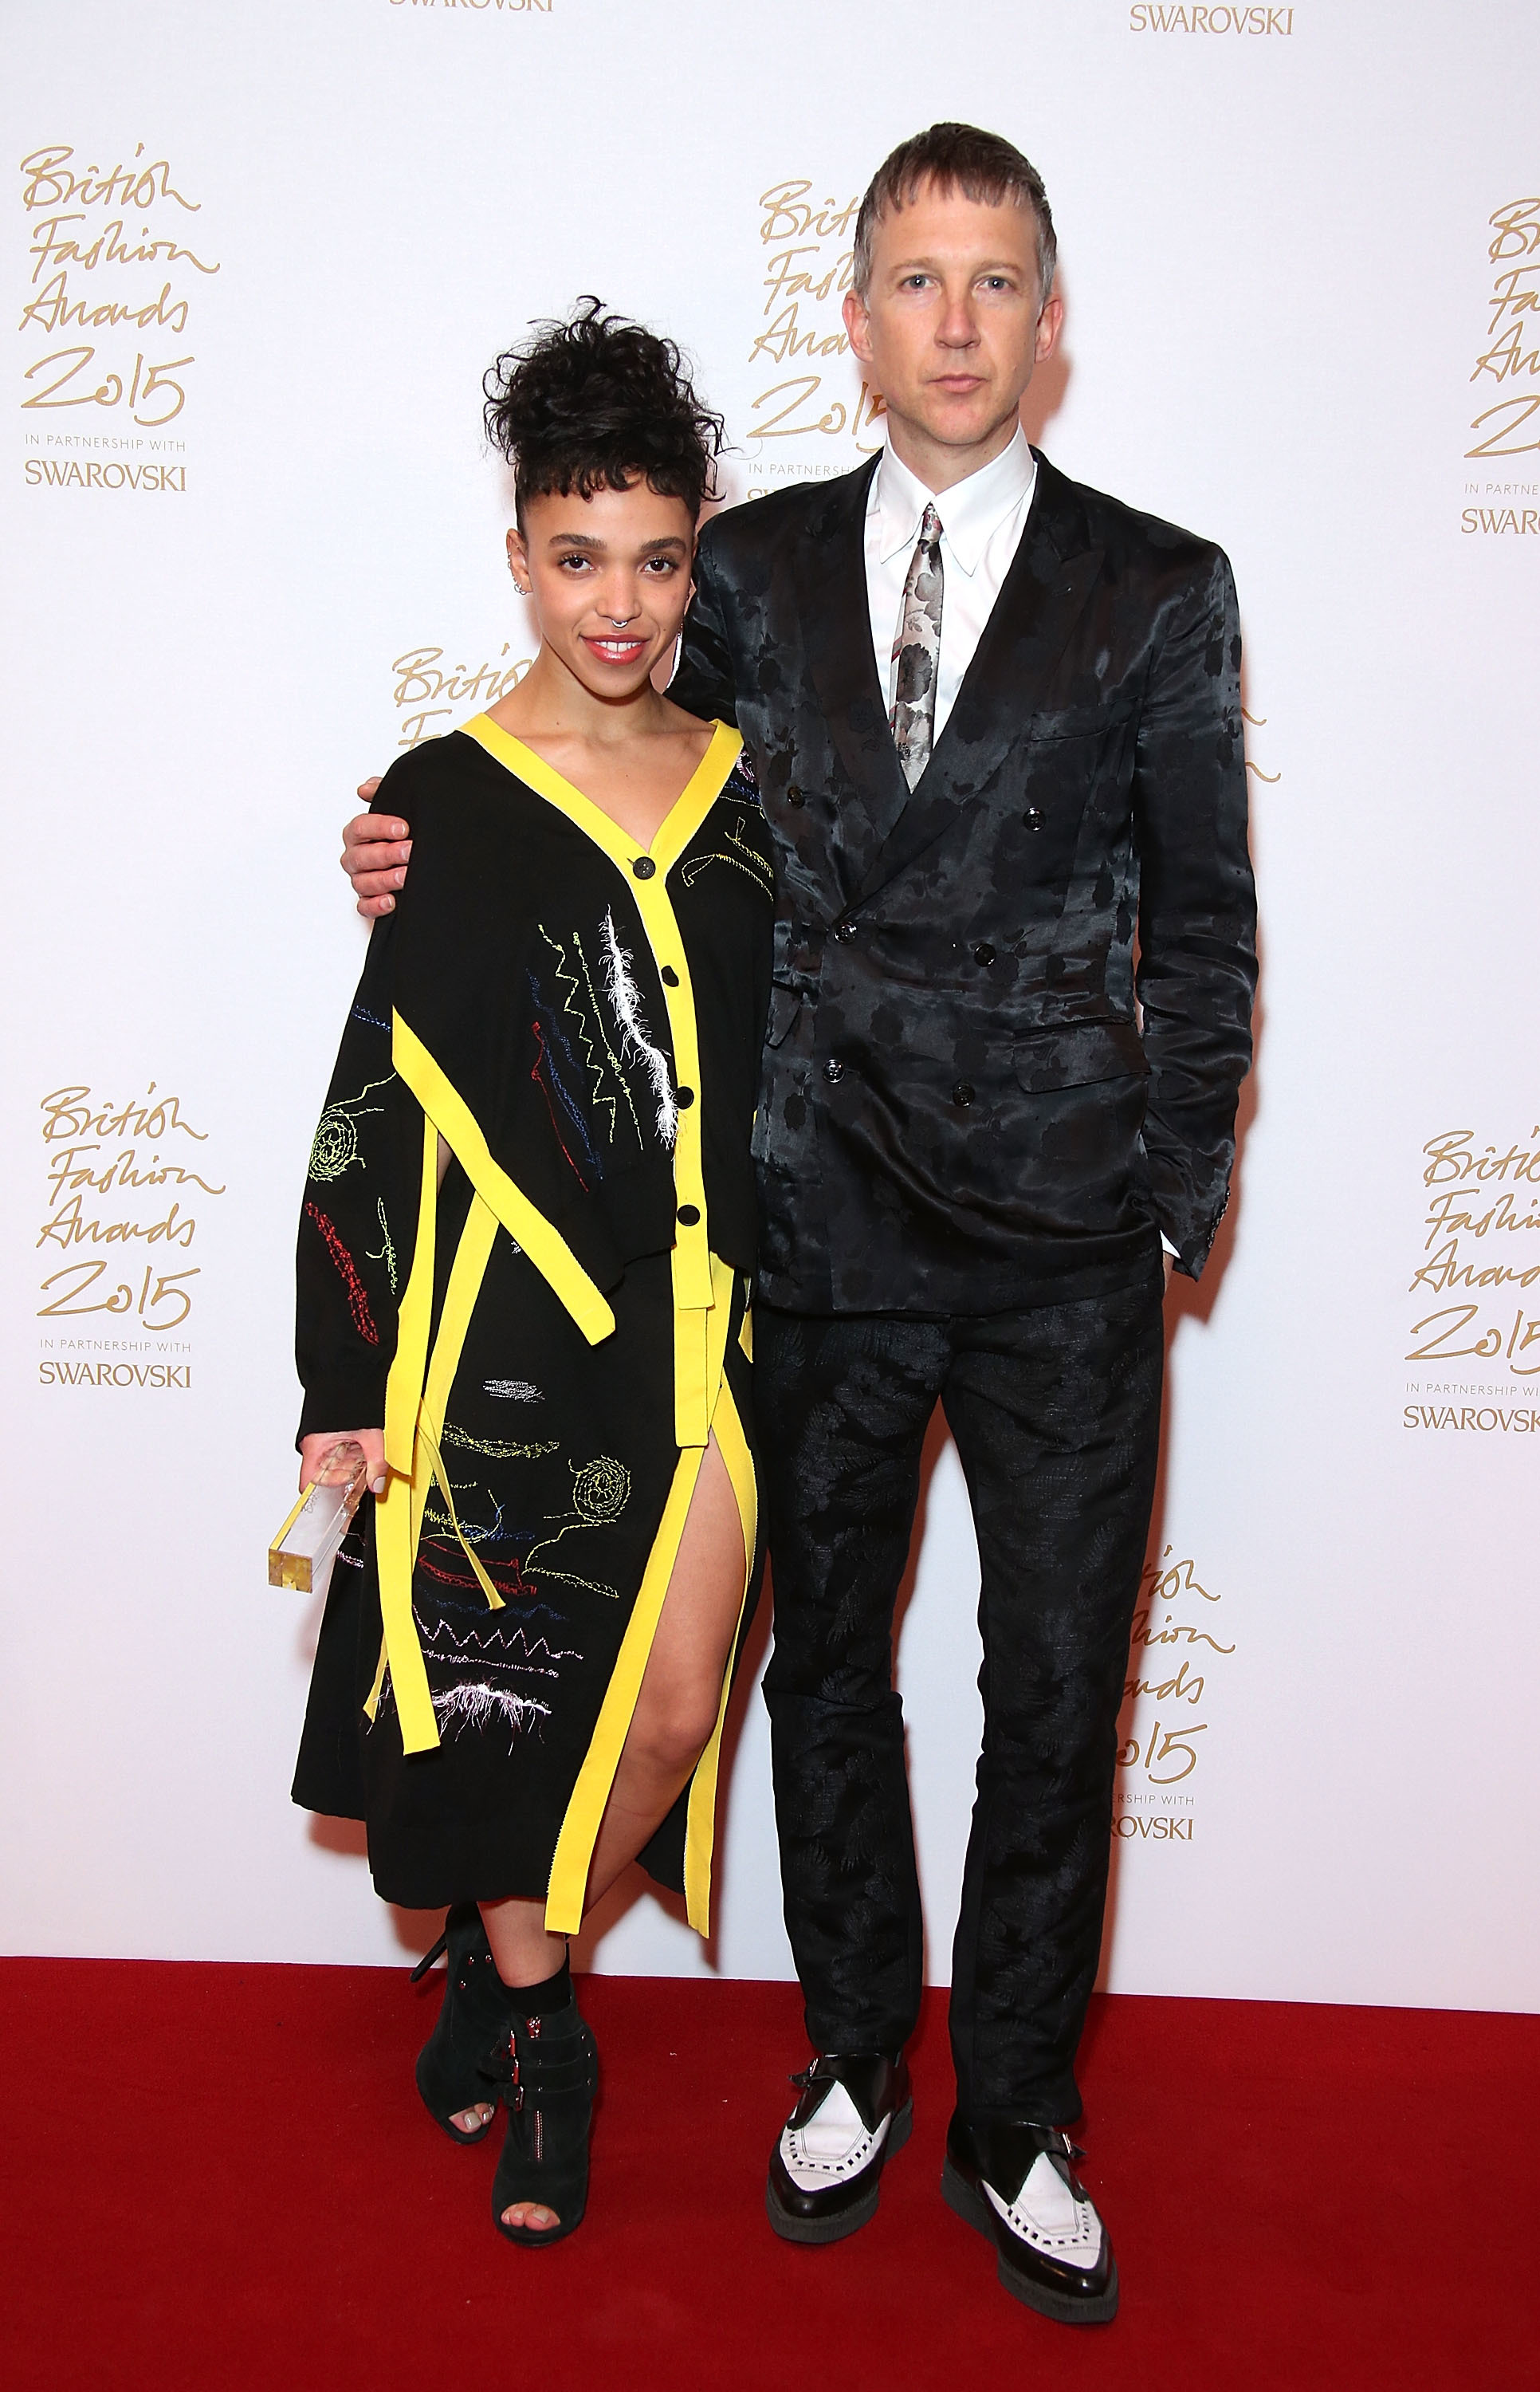 Double triumph for JW Anderson at British Fashion Awards